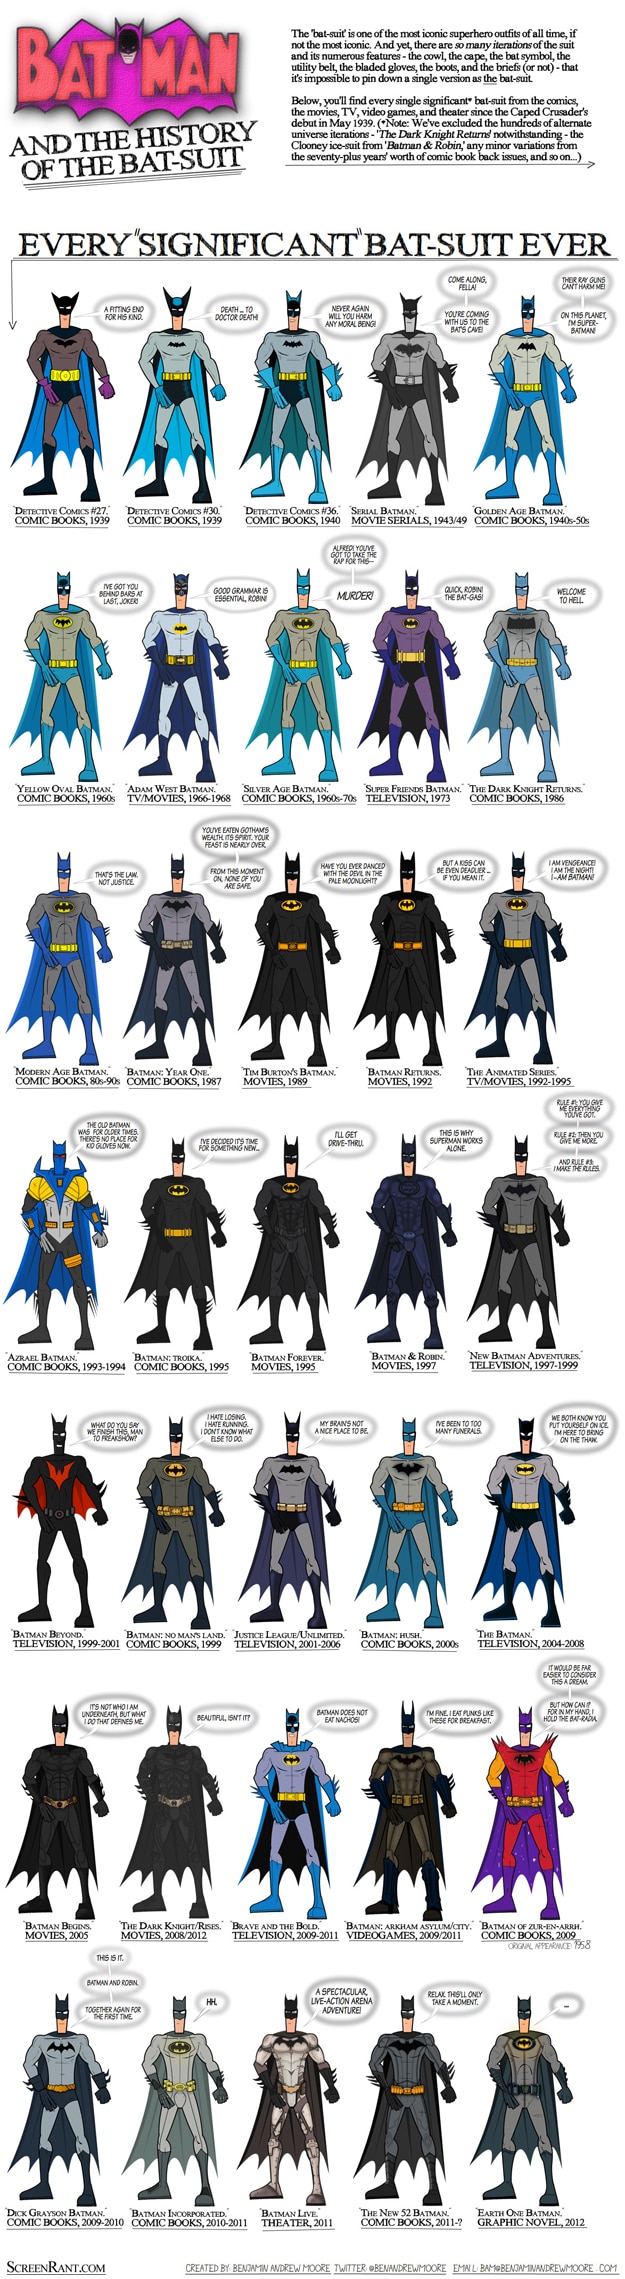 Every Bat Suit Ever Made